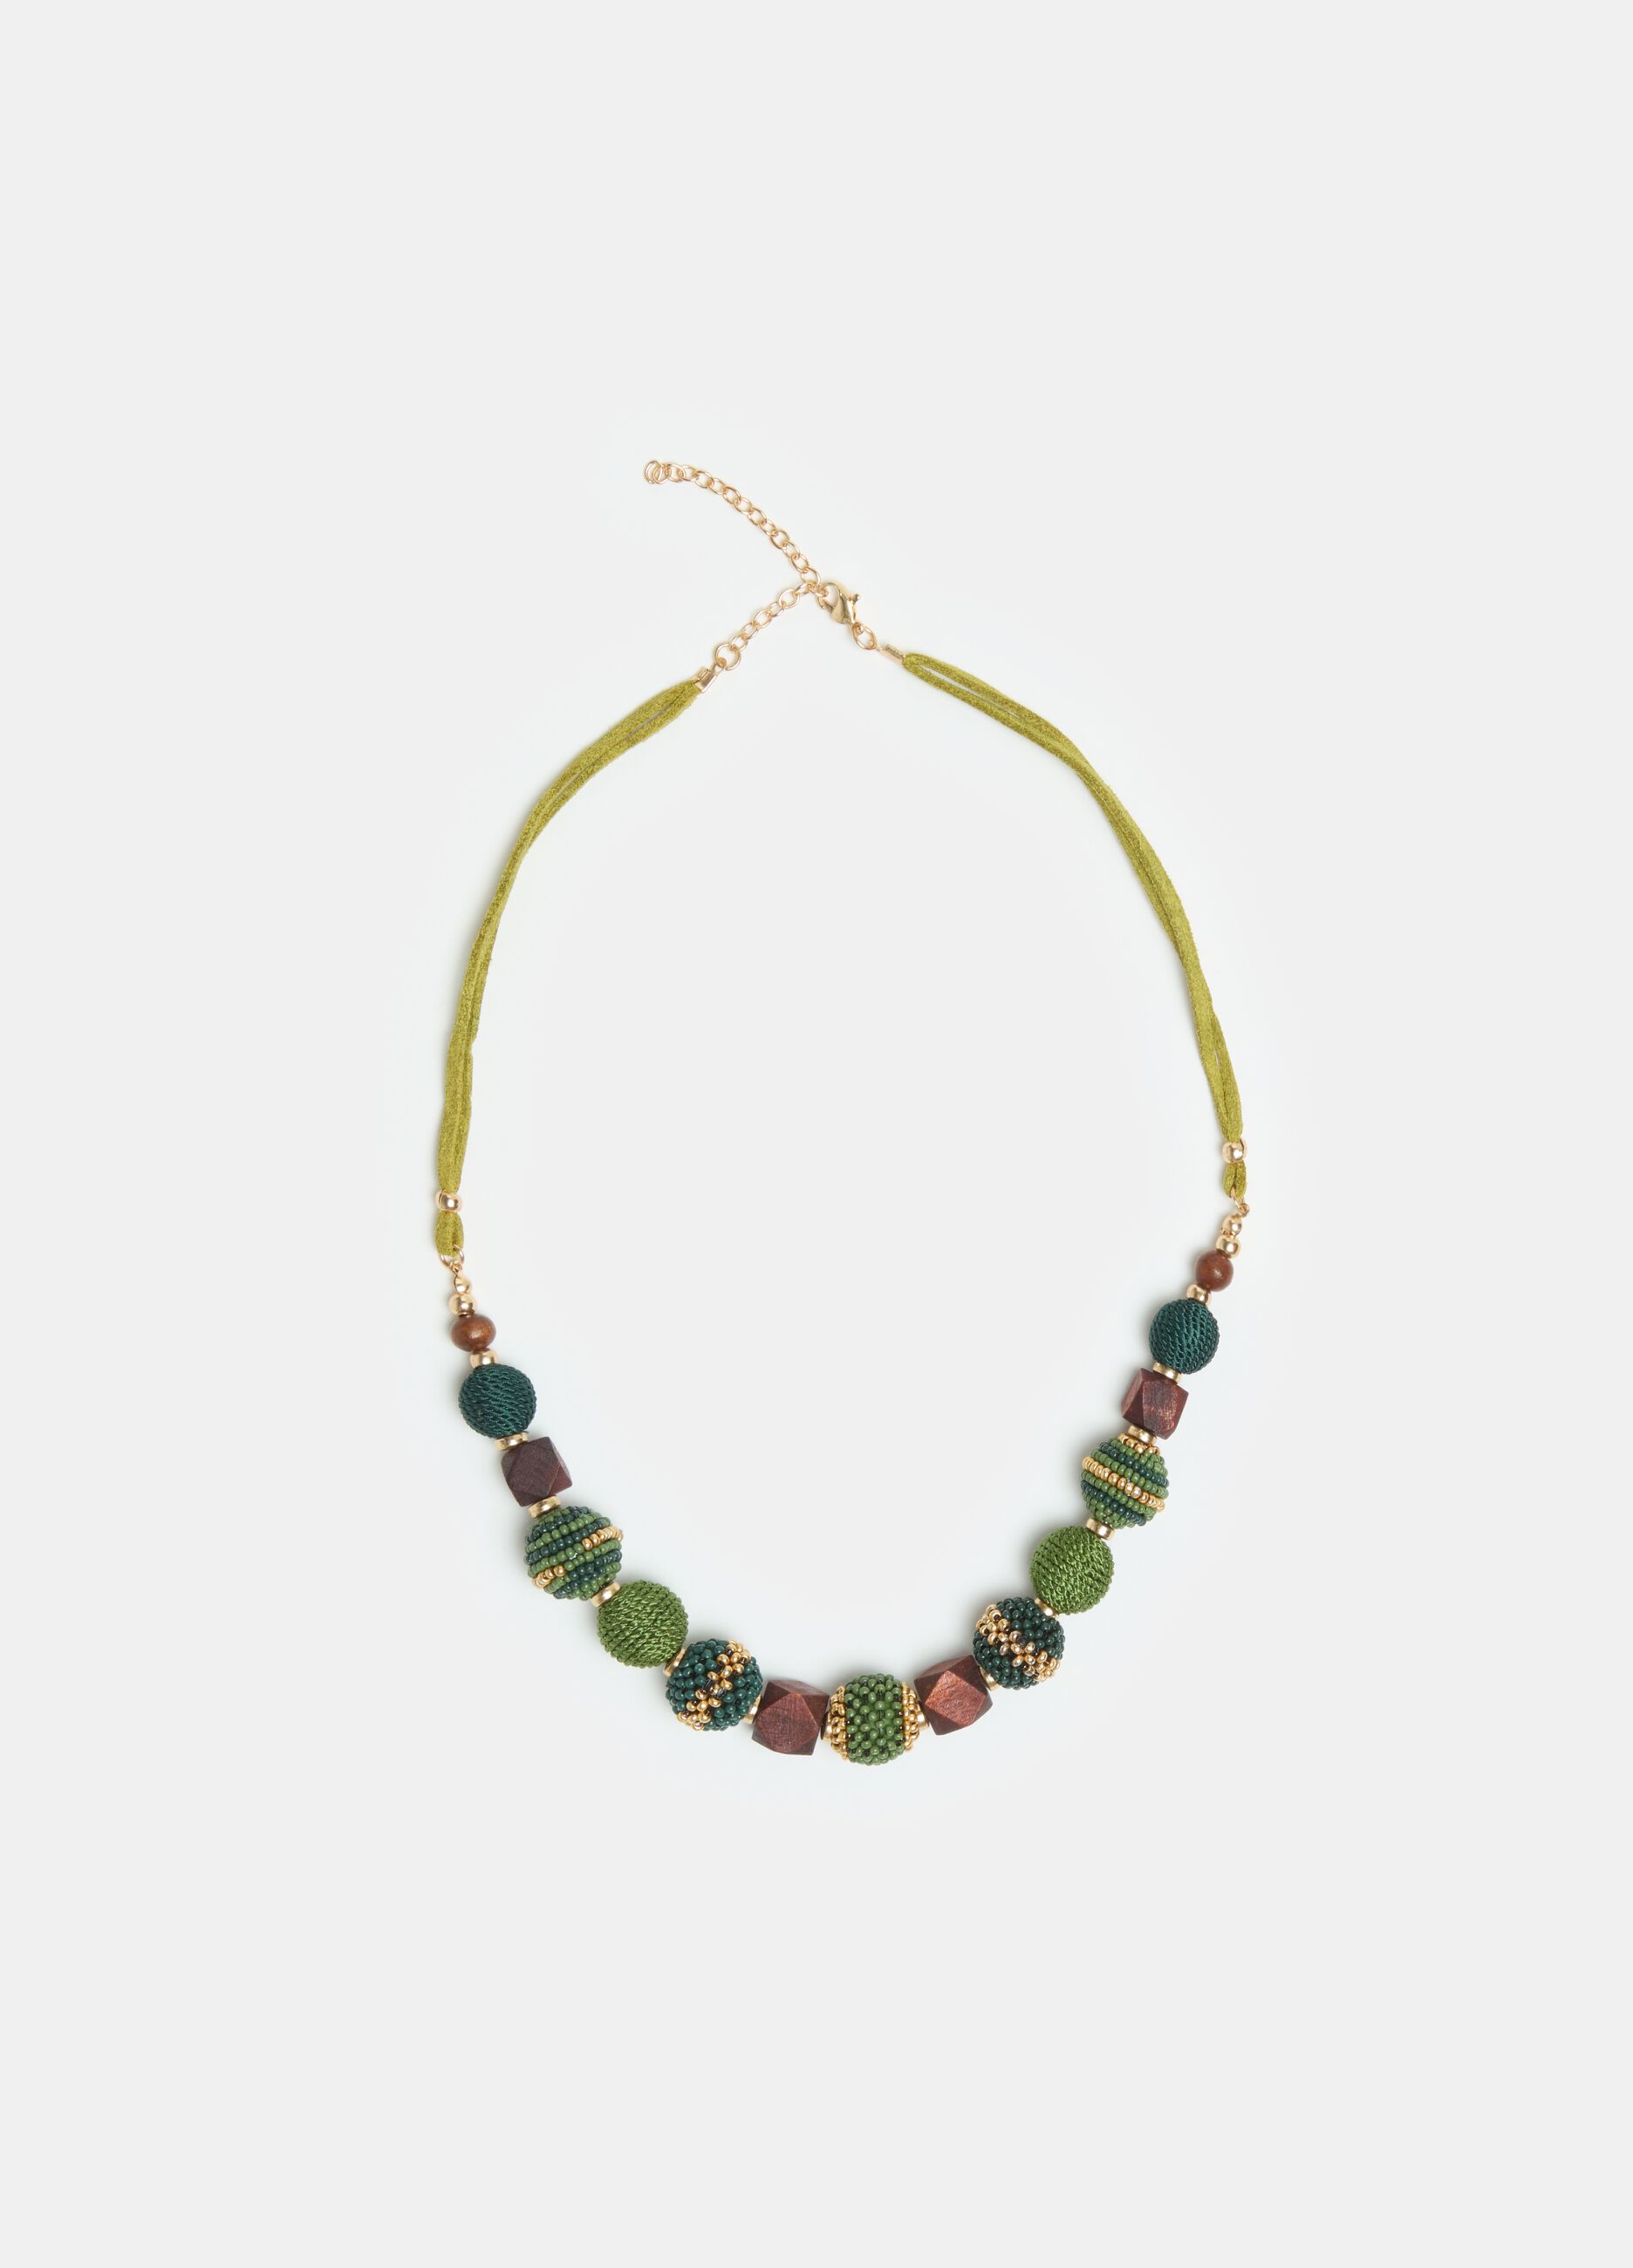 Ethnic necklace with stones and beads